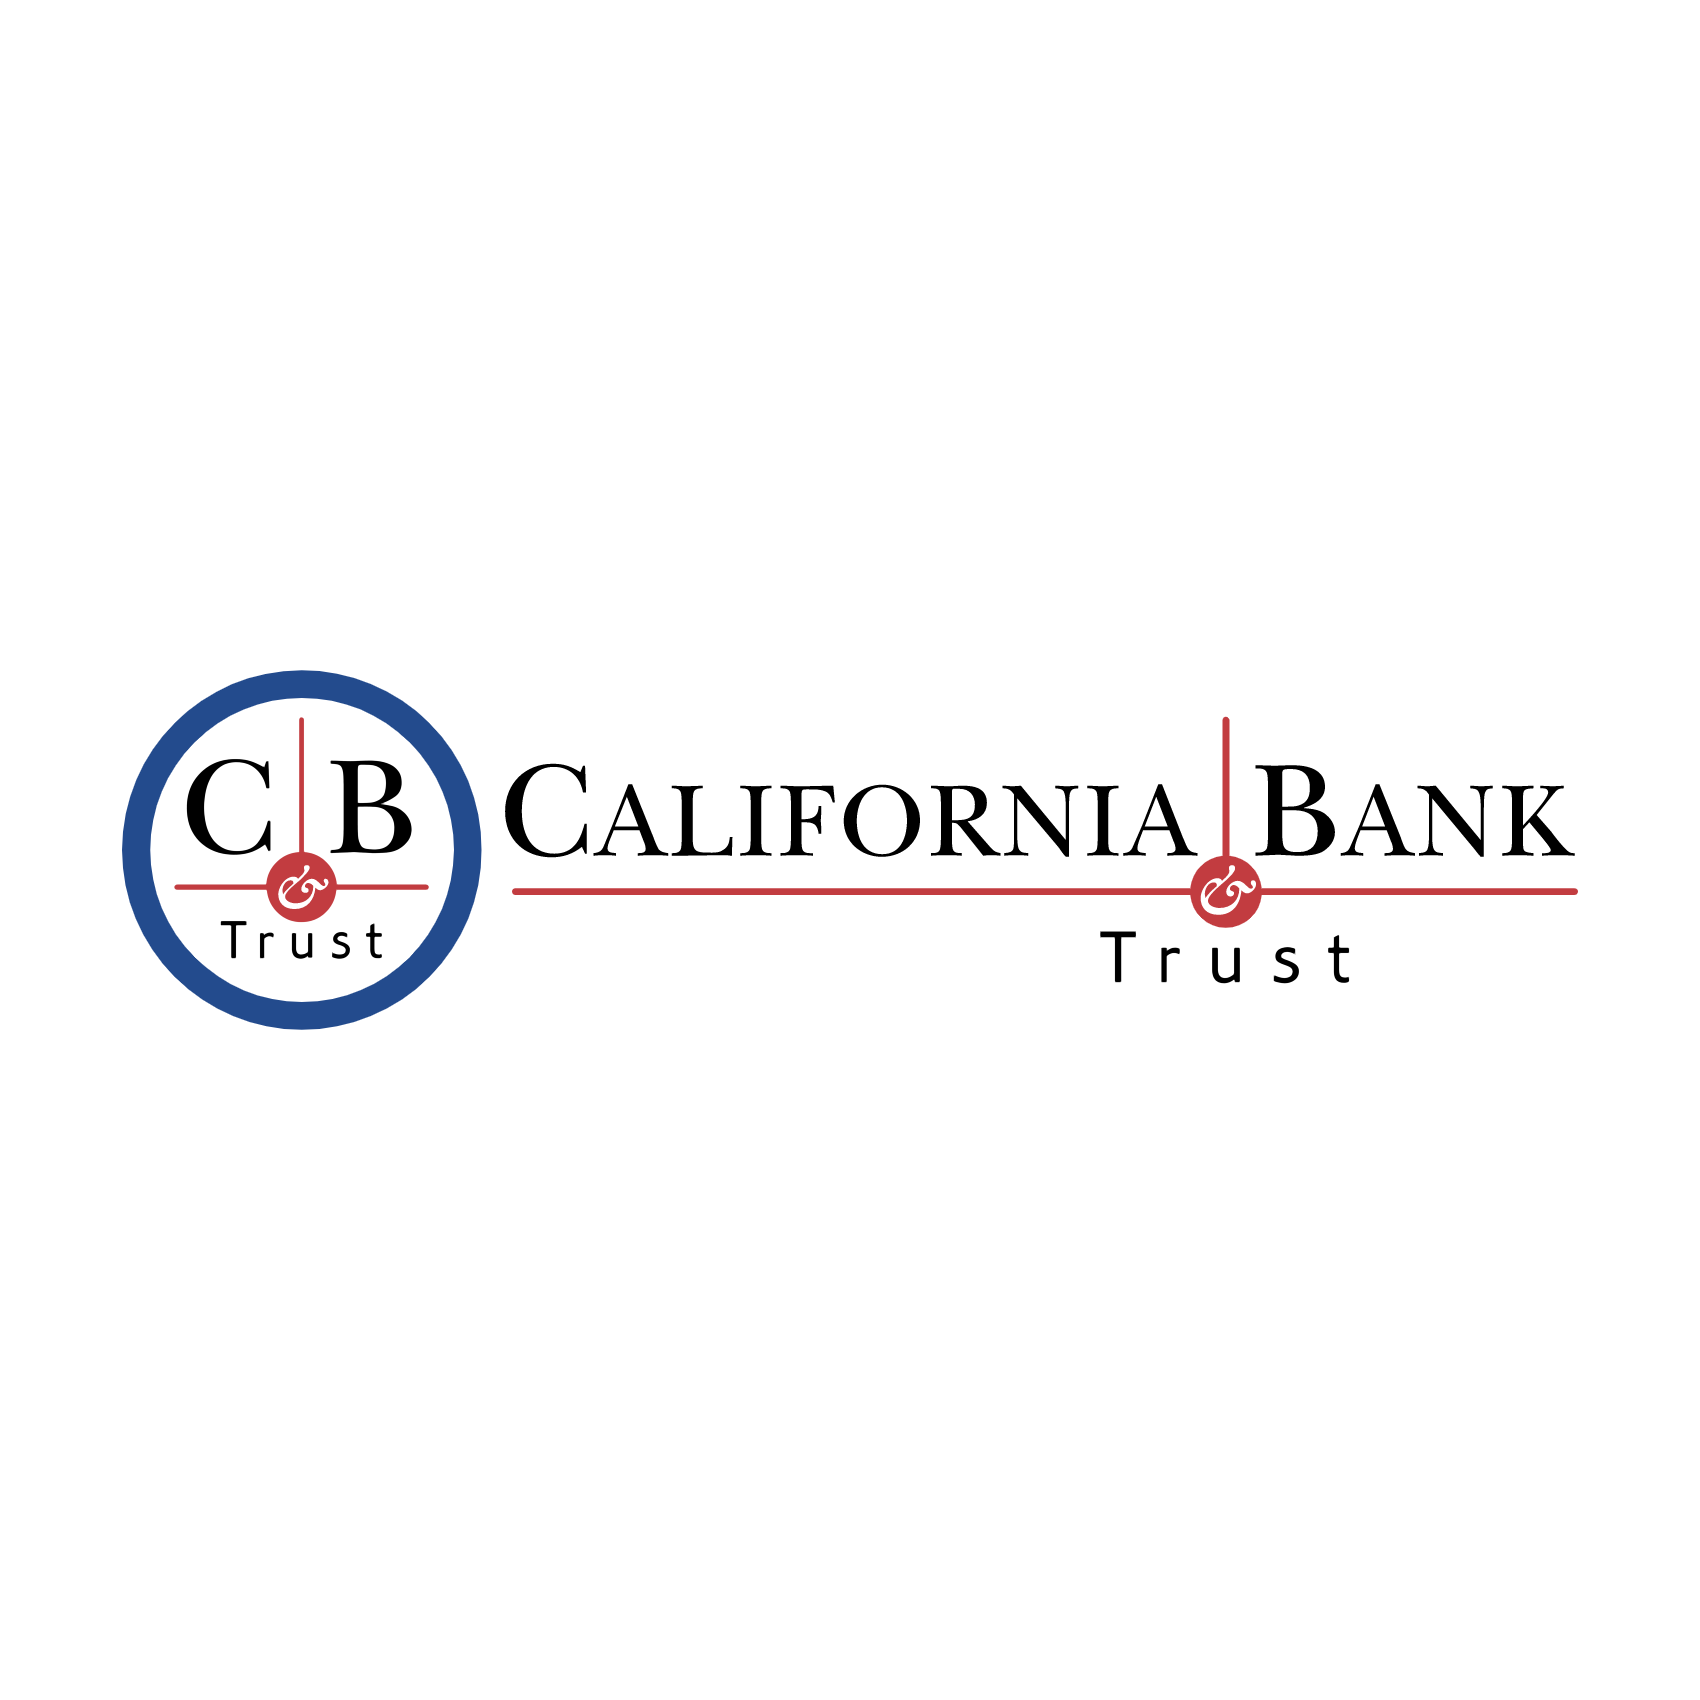 Download California Bank & Trust Logo PNG and Vector (PDF, SVG, Ai, EPS ...